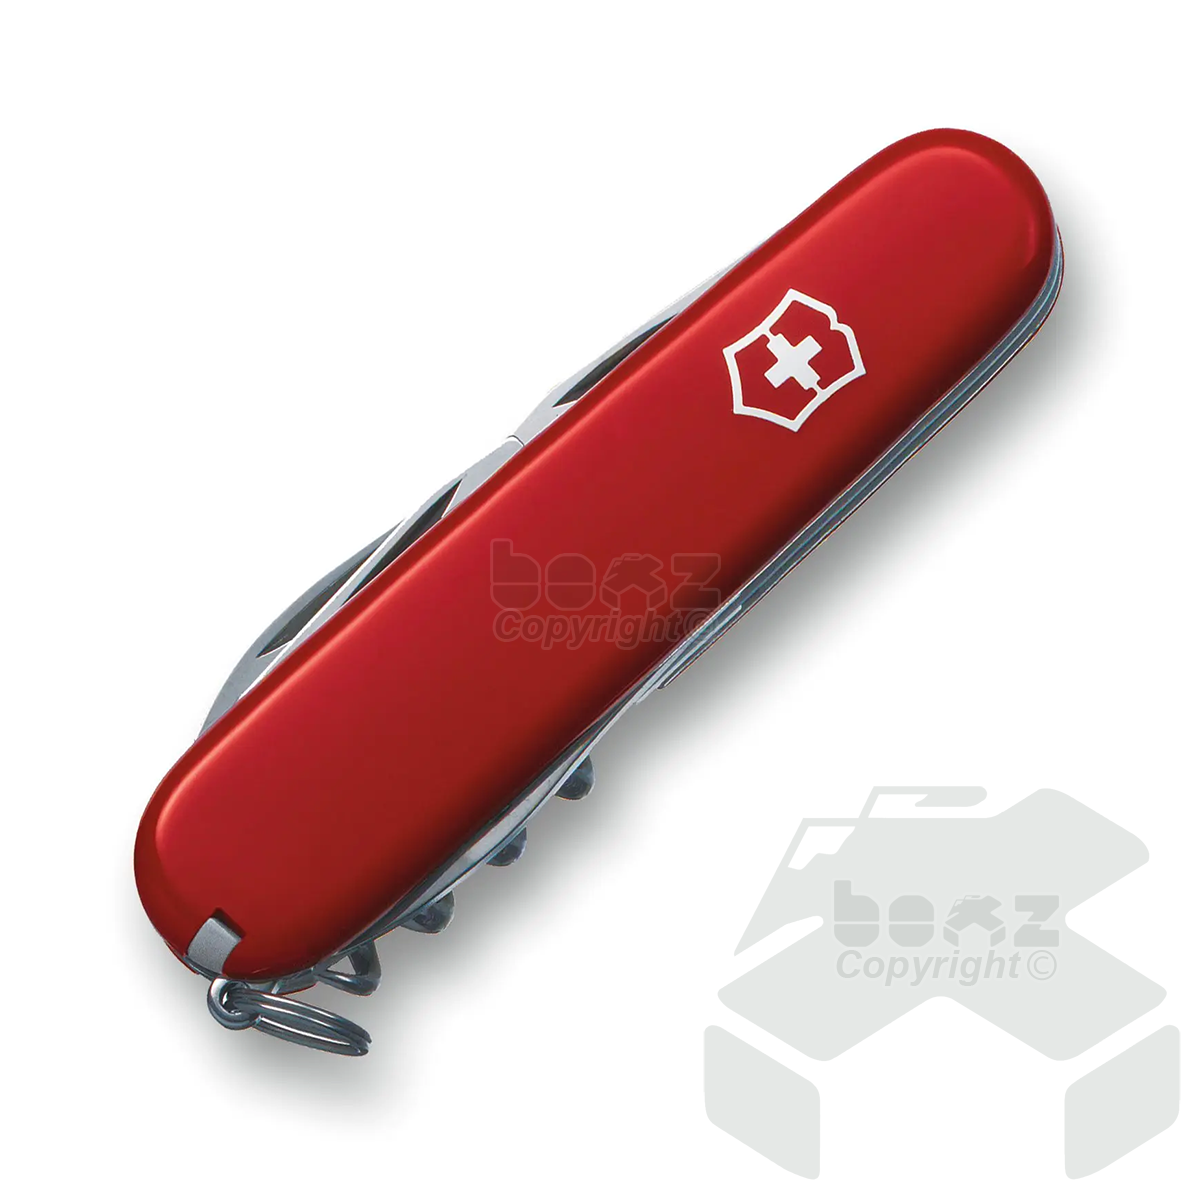 Victorinox Spartan Knife UK Legal Carry Red